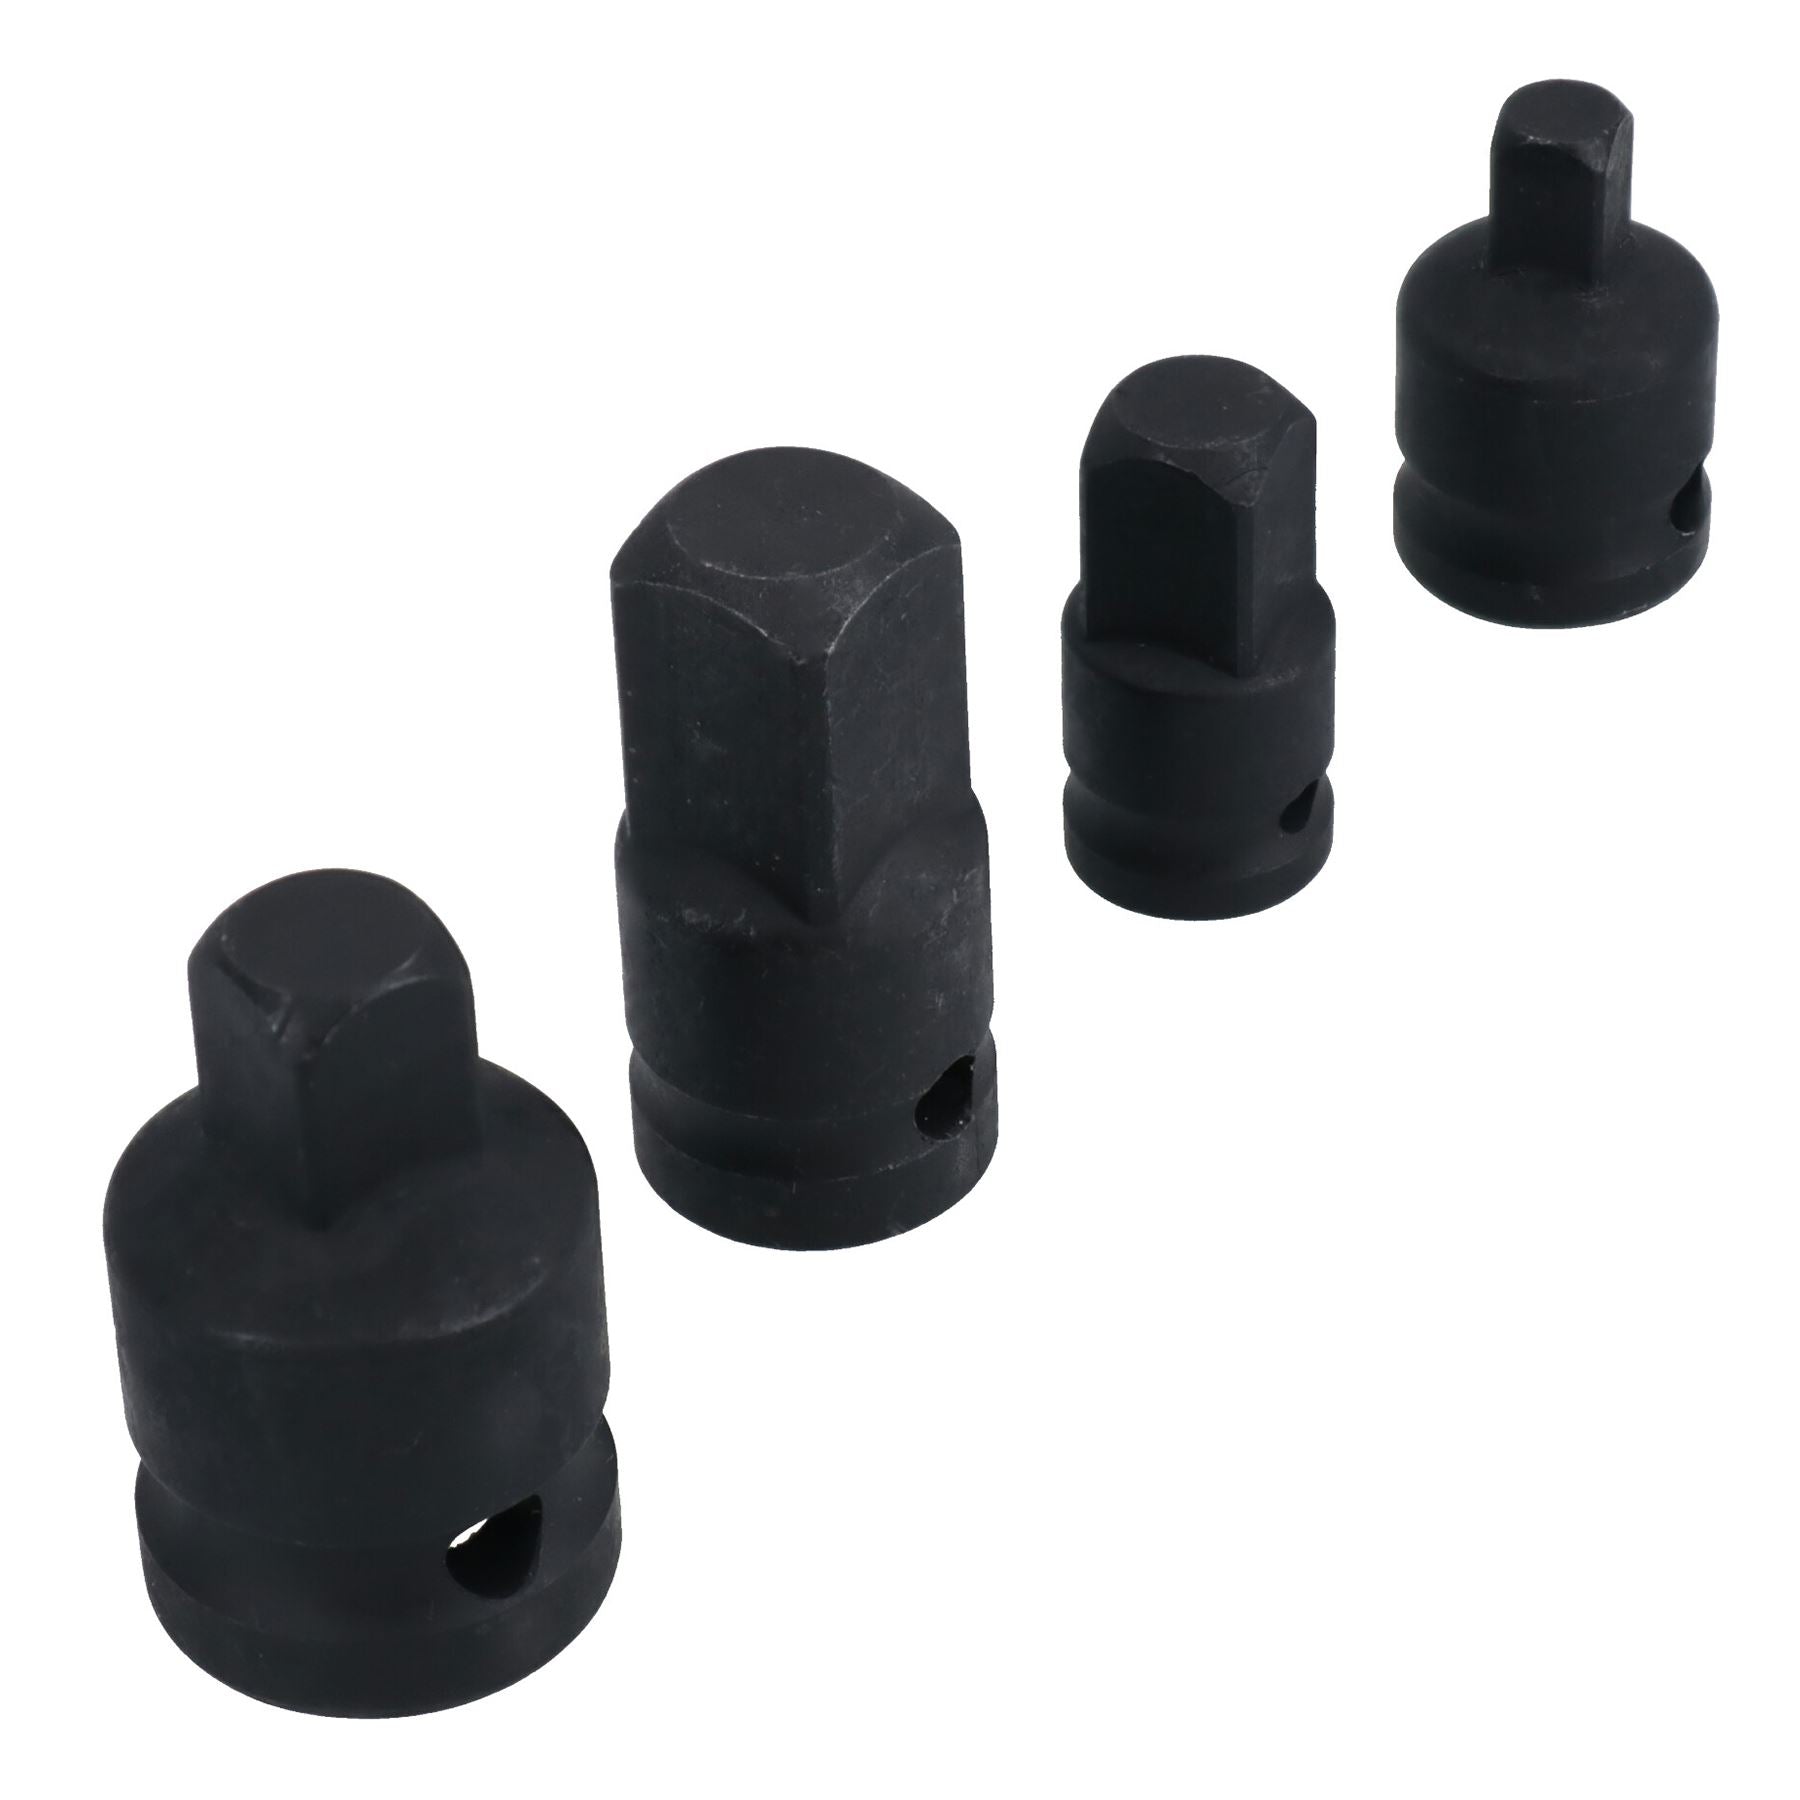 4pc Impact Socket Adaptor Adapter Step Up Step Down Reducer Converter